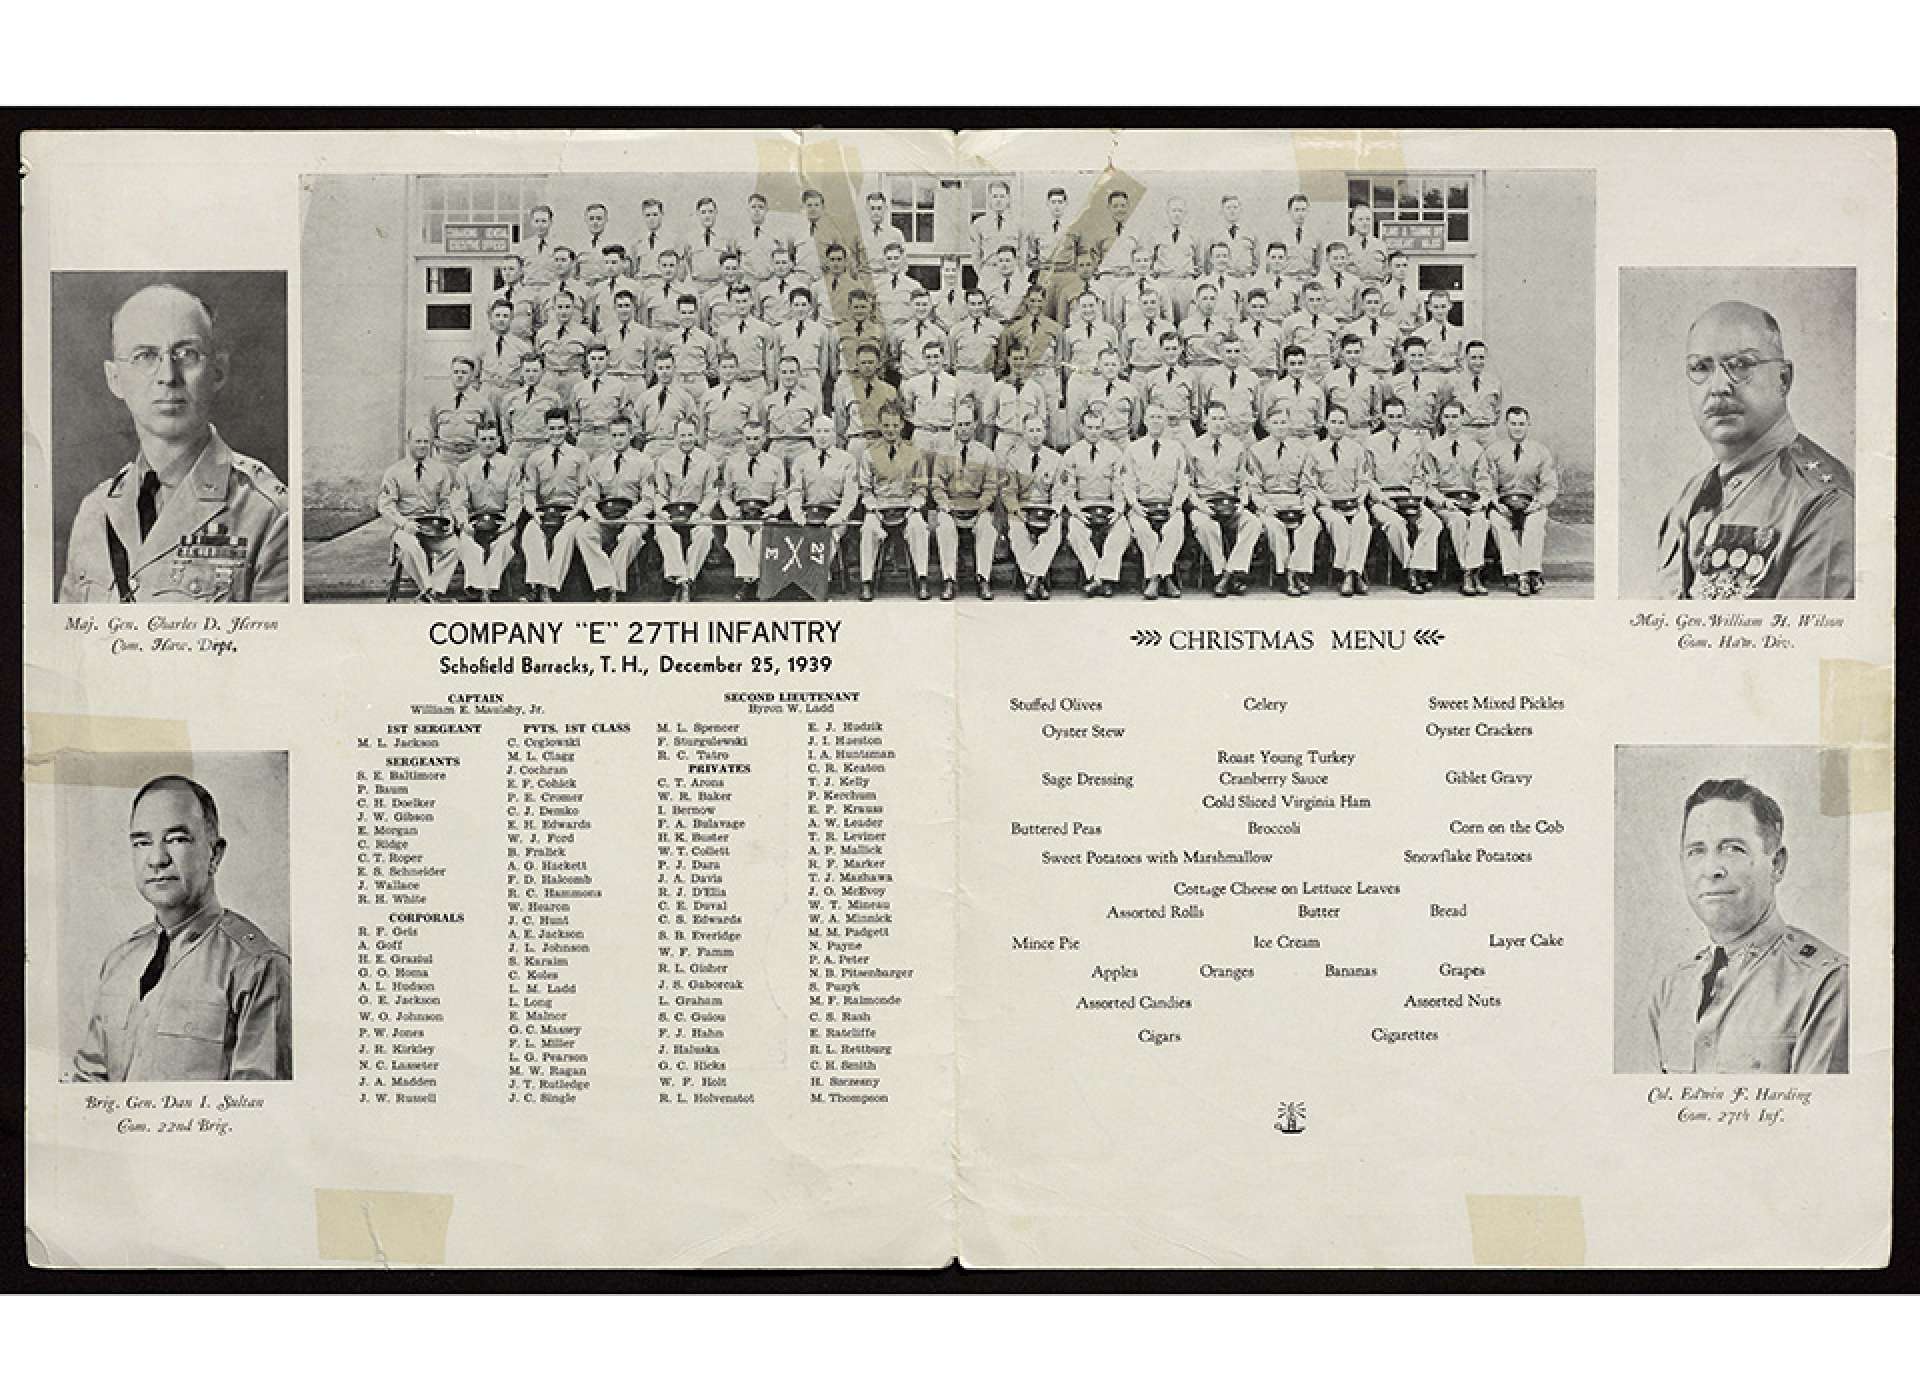 The 85 men of Company E, 27th Infantry Regiment seen in the centerfold of the menu